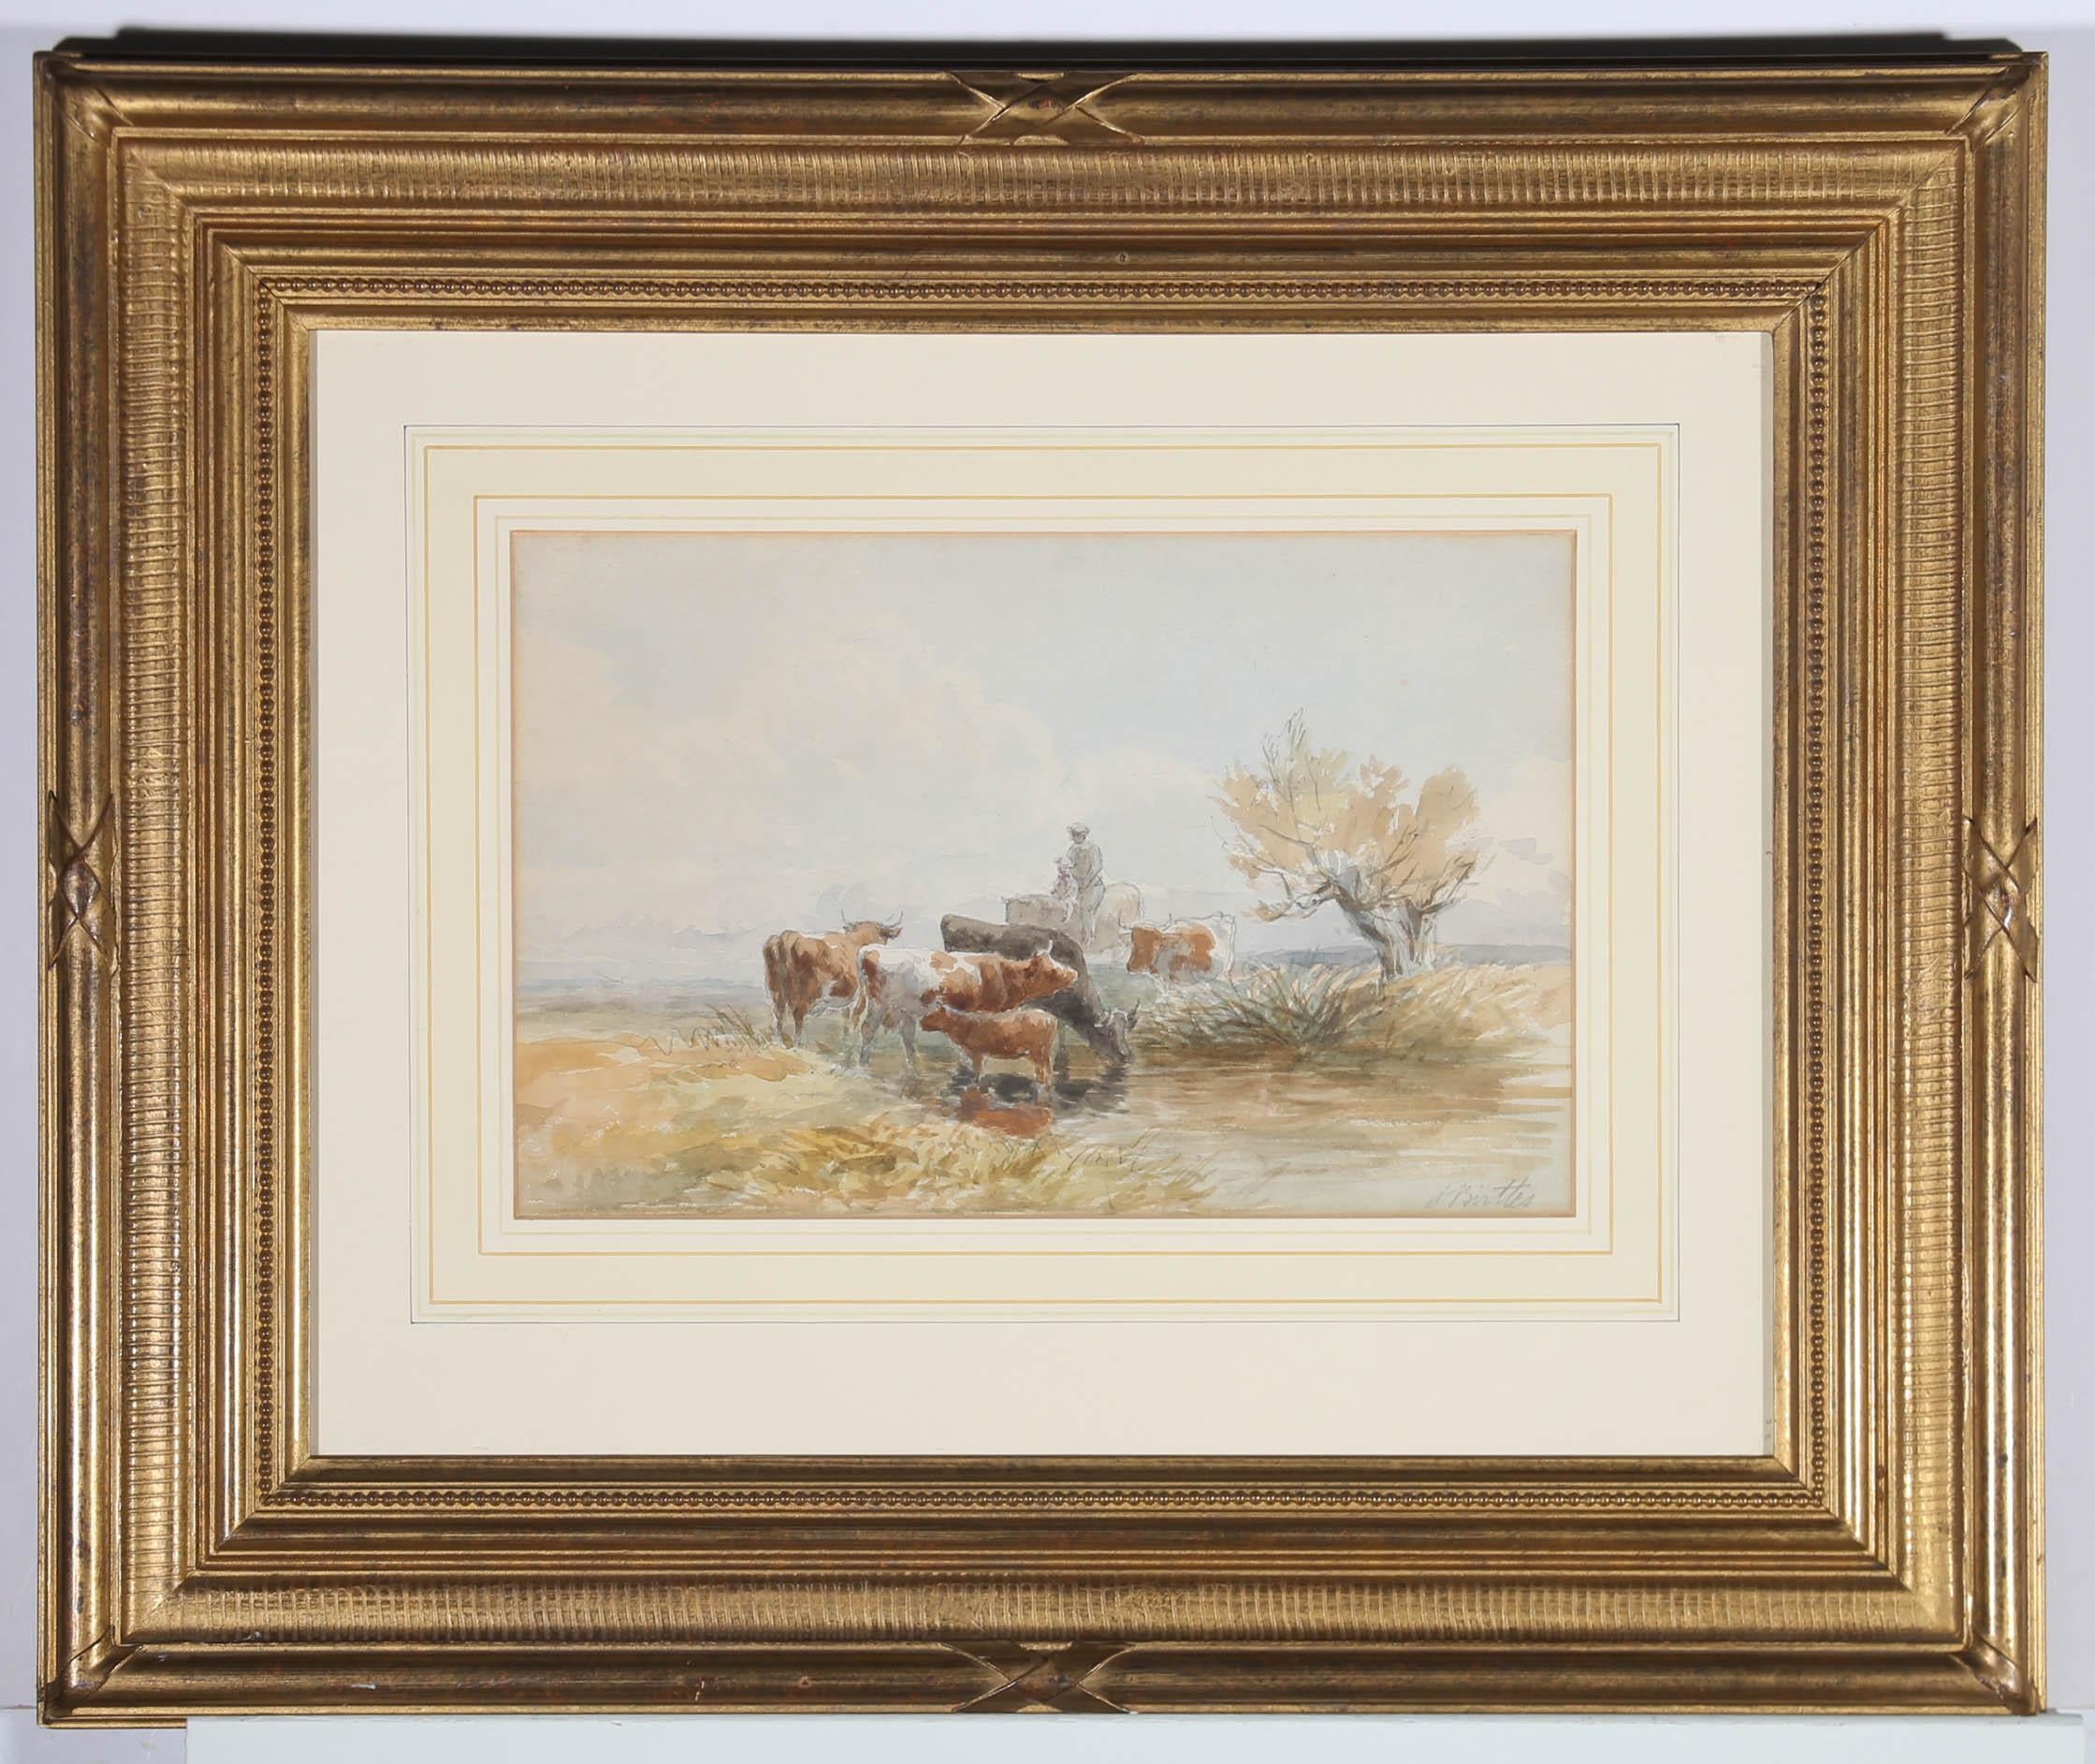 Attrib. Henry Birtles RA (1838-1907) - Framed Watercolour, Figures & Cattle For Sale 2